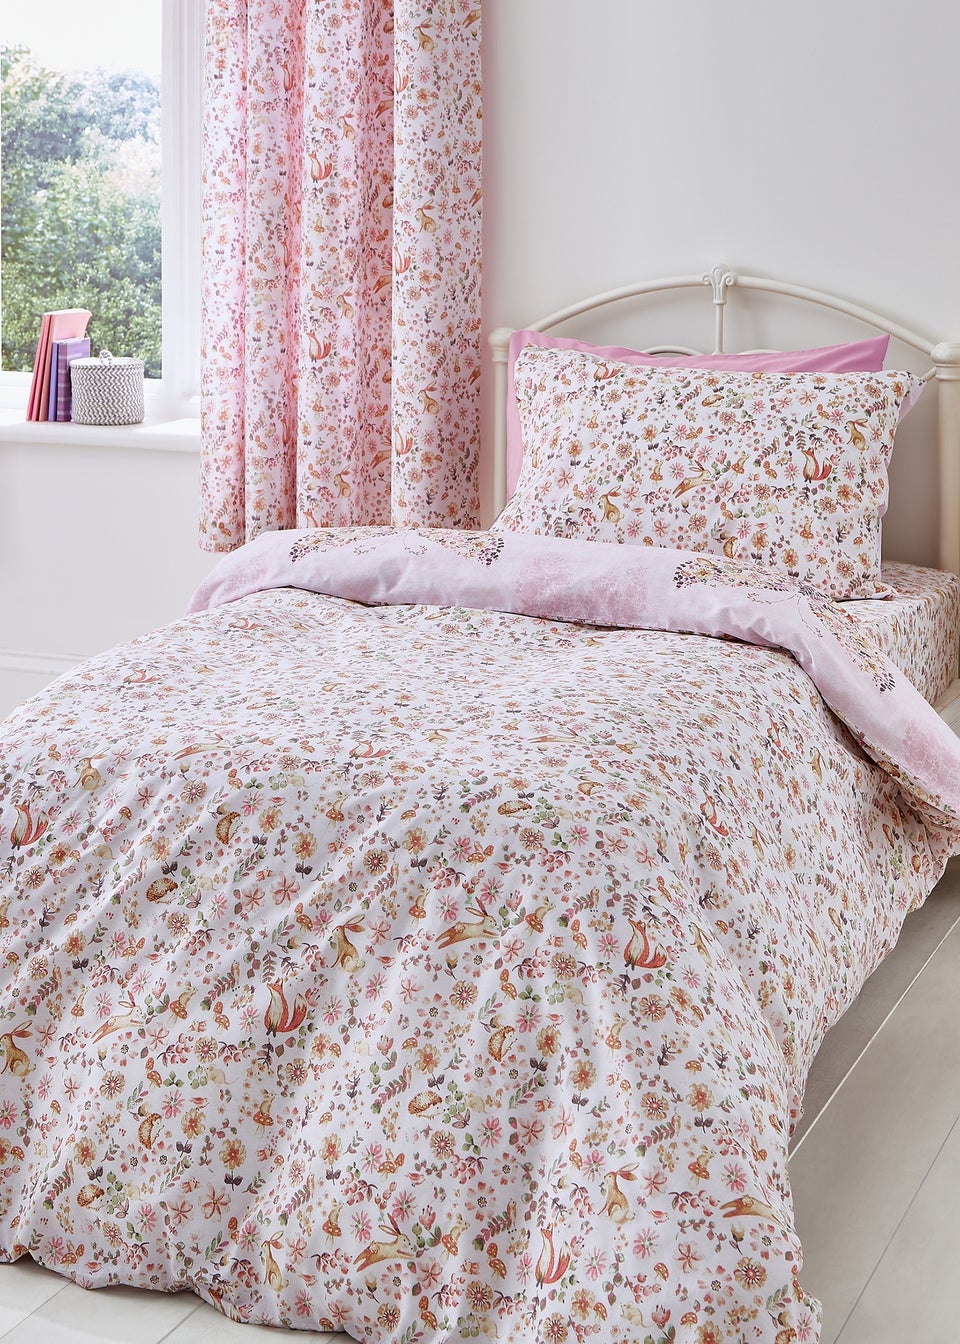 Catherine Lansfield Enchanted Butterfly Reversible Duvet Cover Set